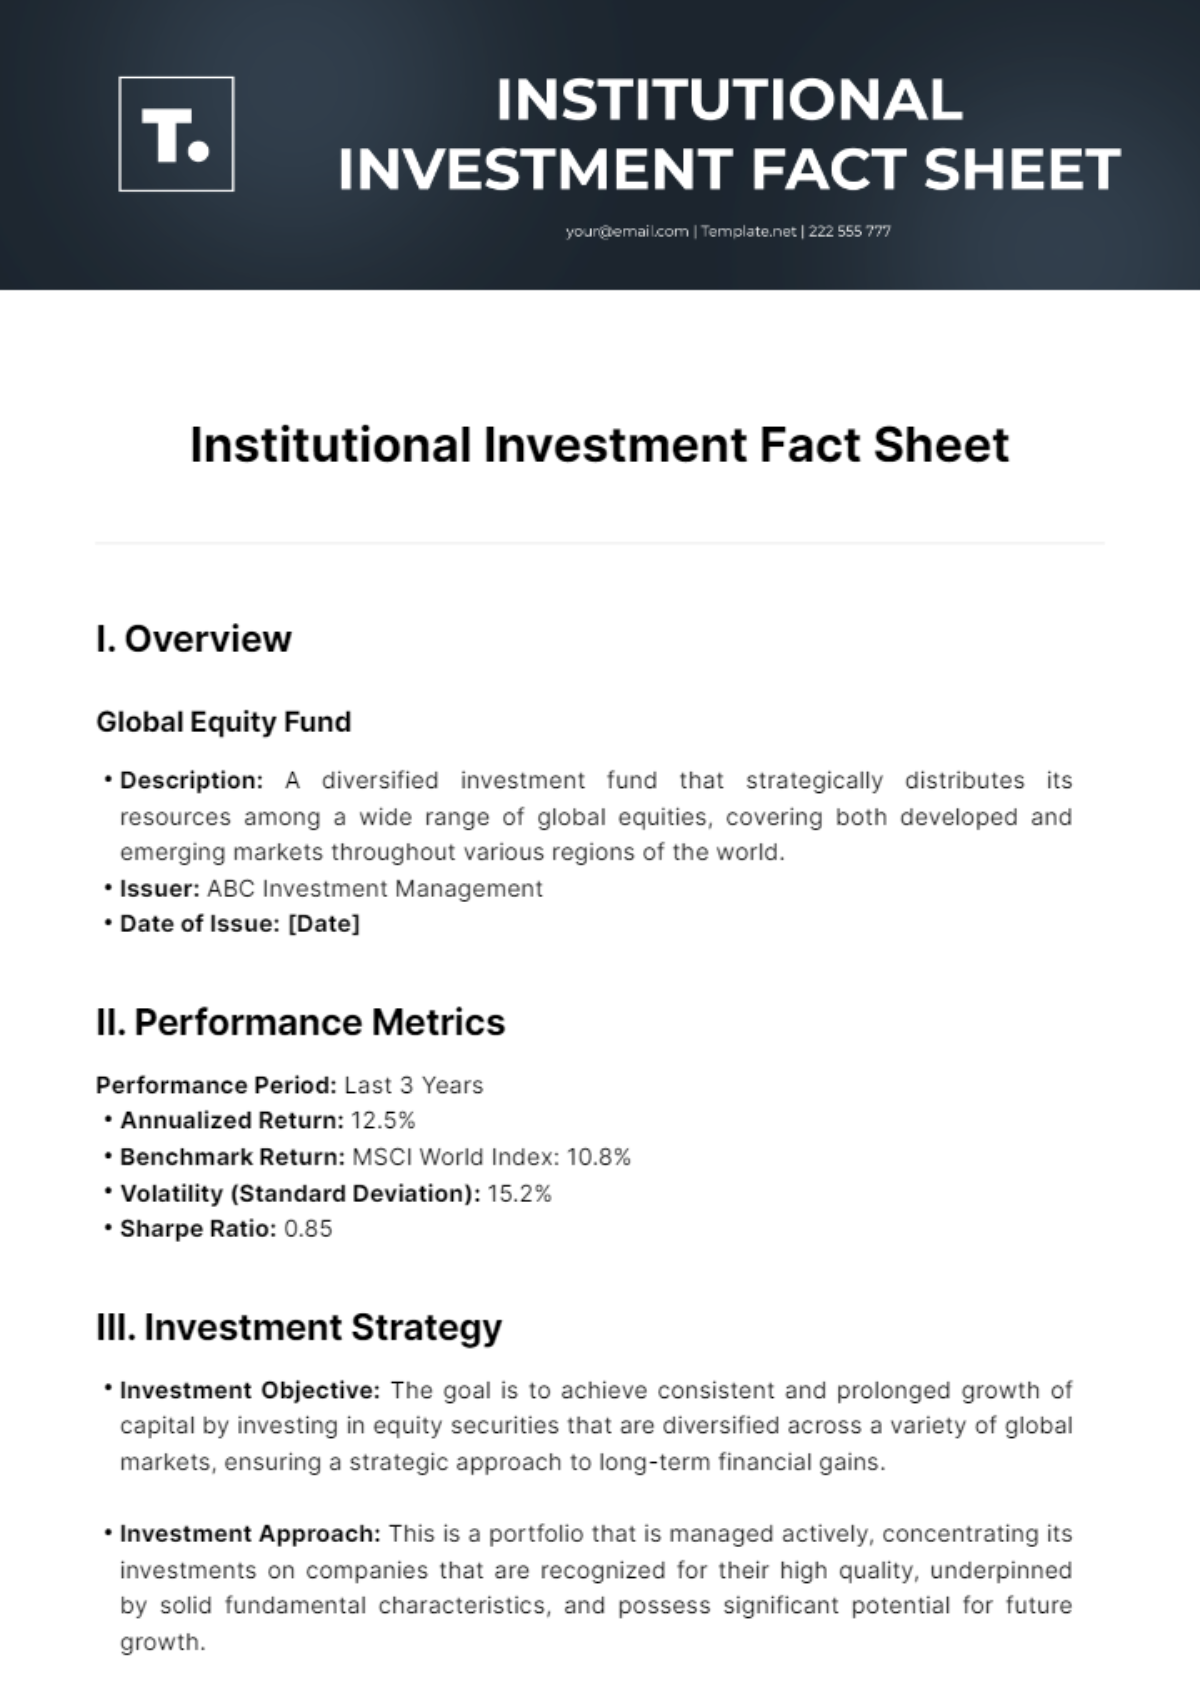 Institutional Investment Fact Sheet Template